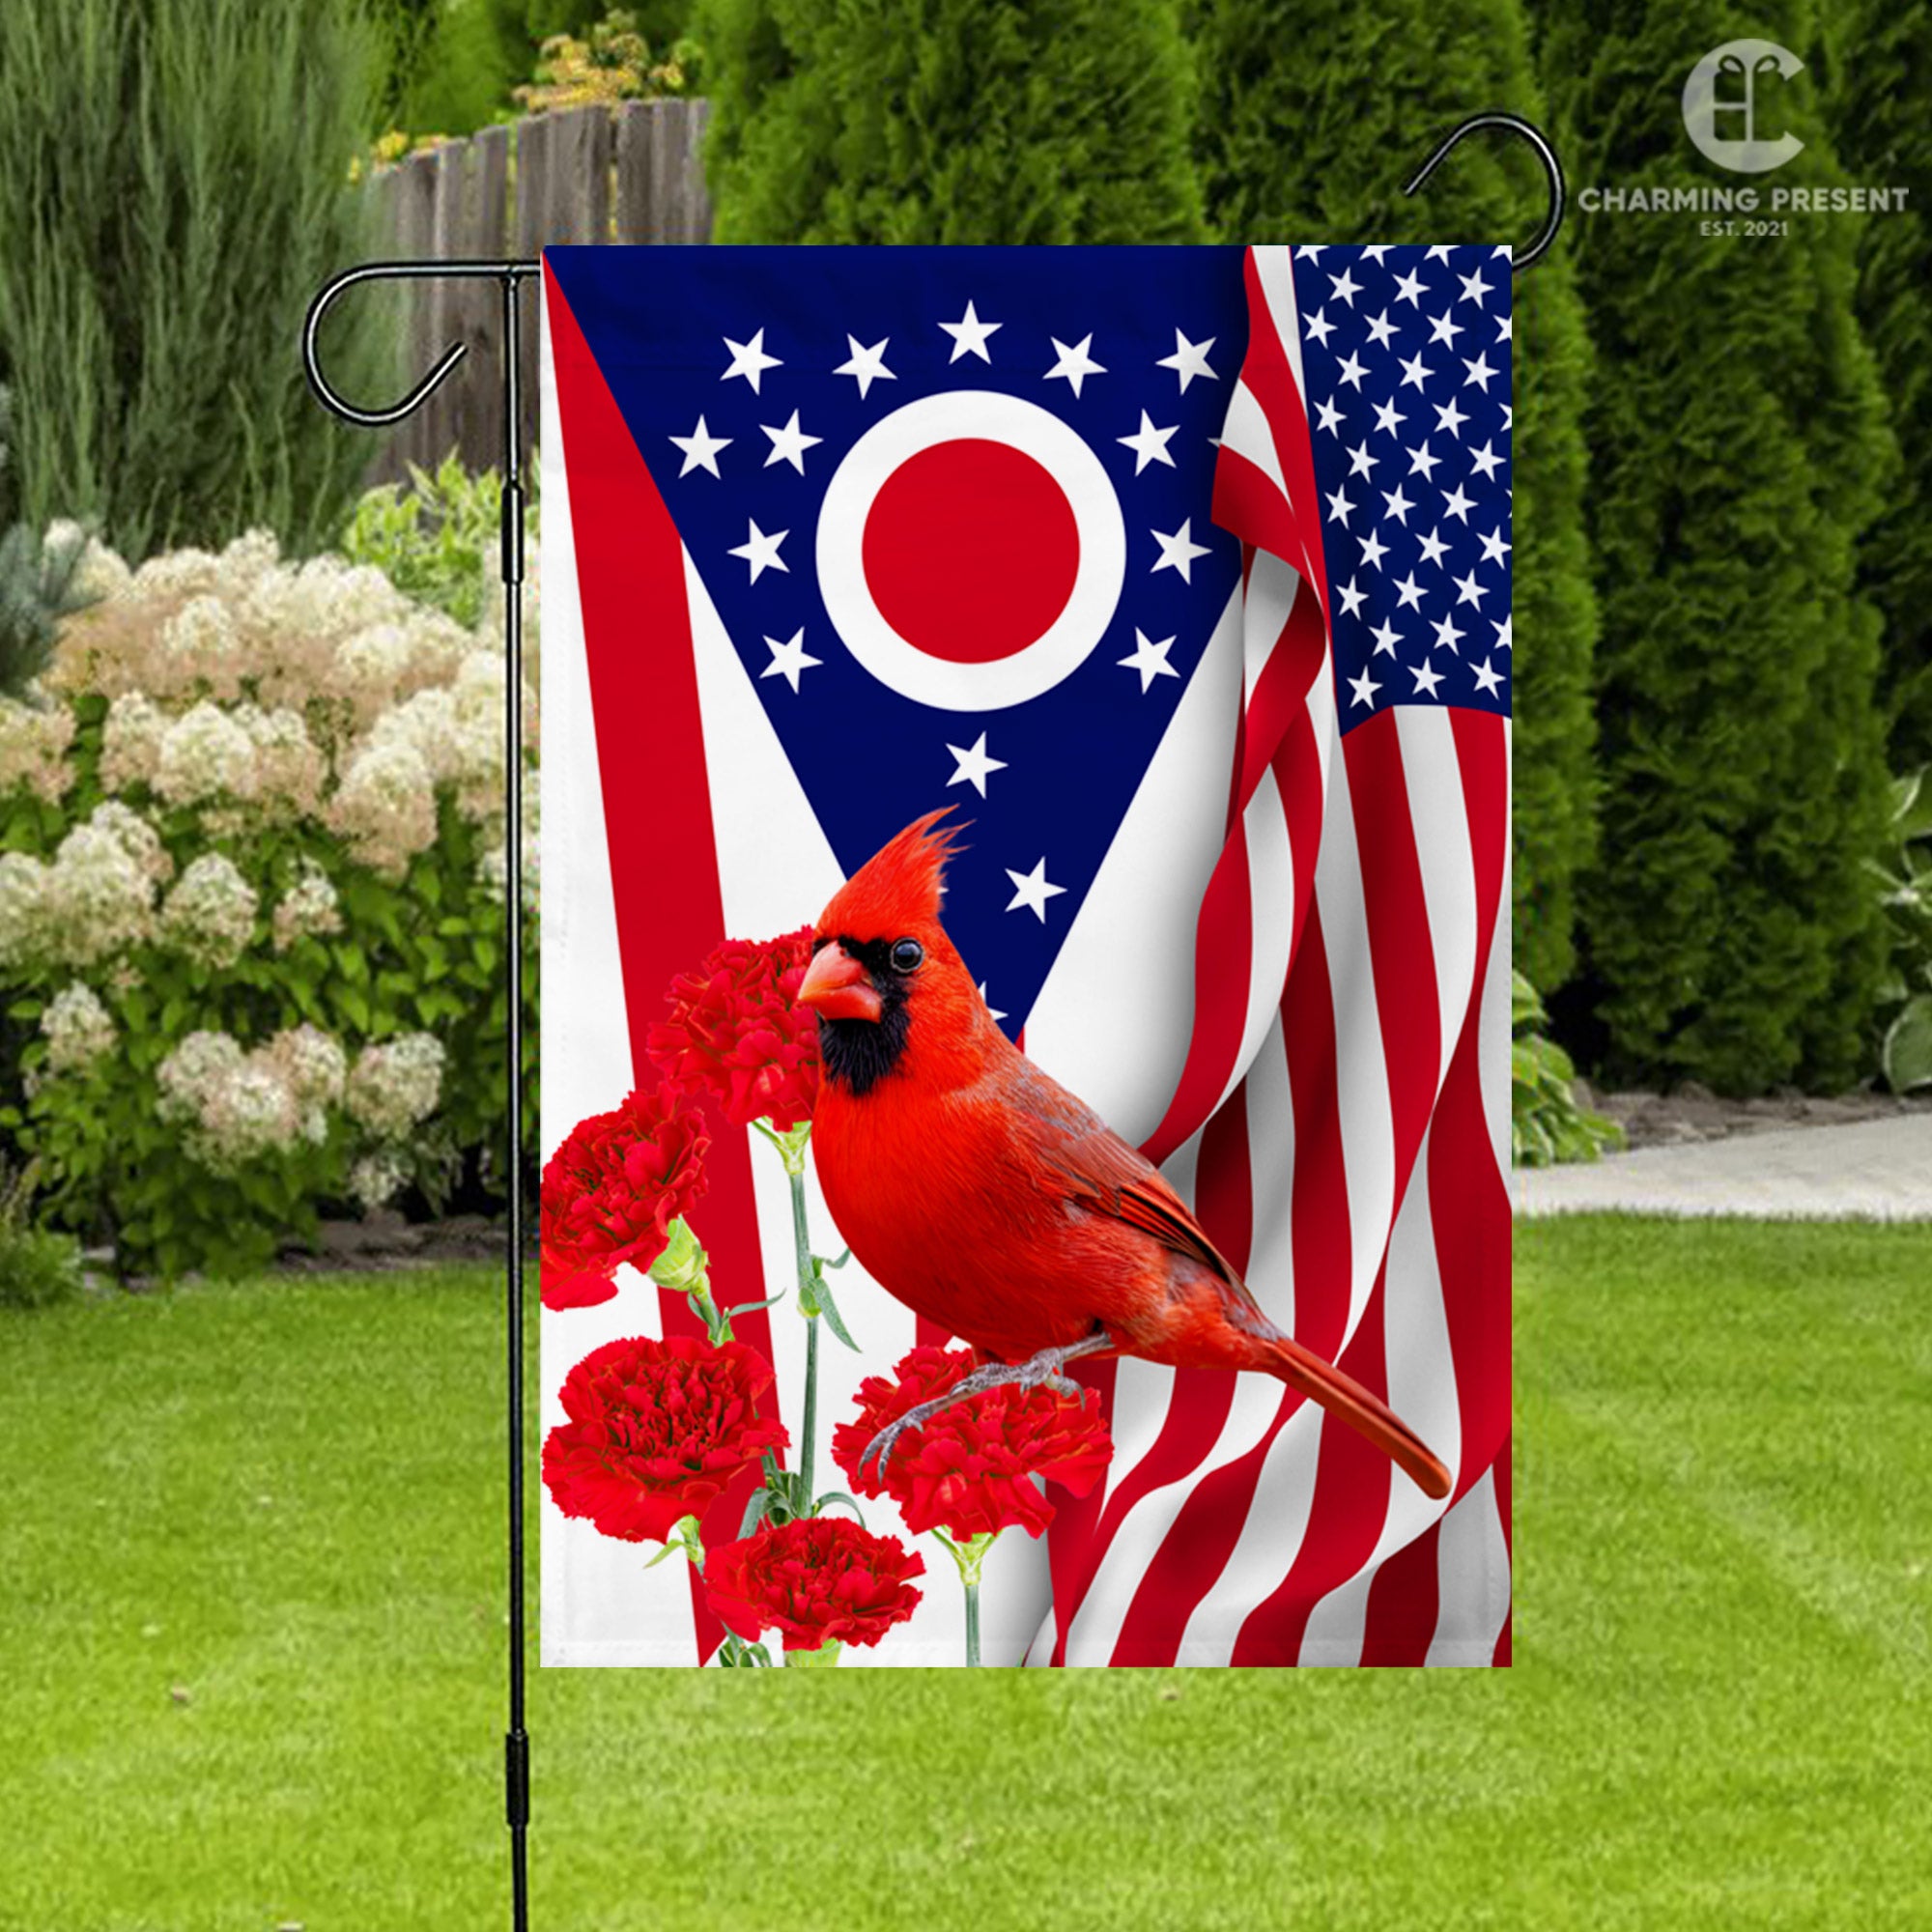 Ohio State Flag Cardinal With Scarlet Carnation Flower - American Ohio State Decoration